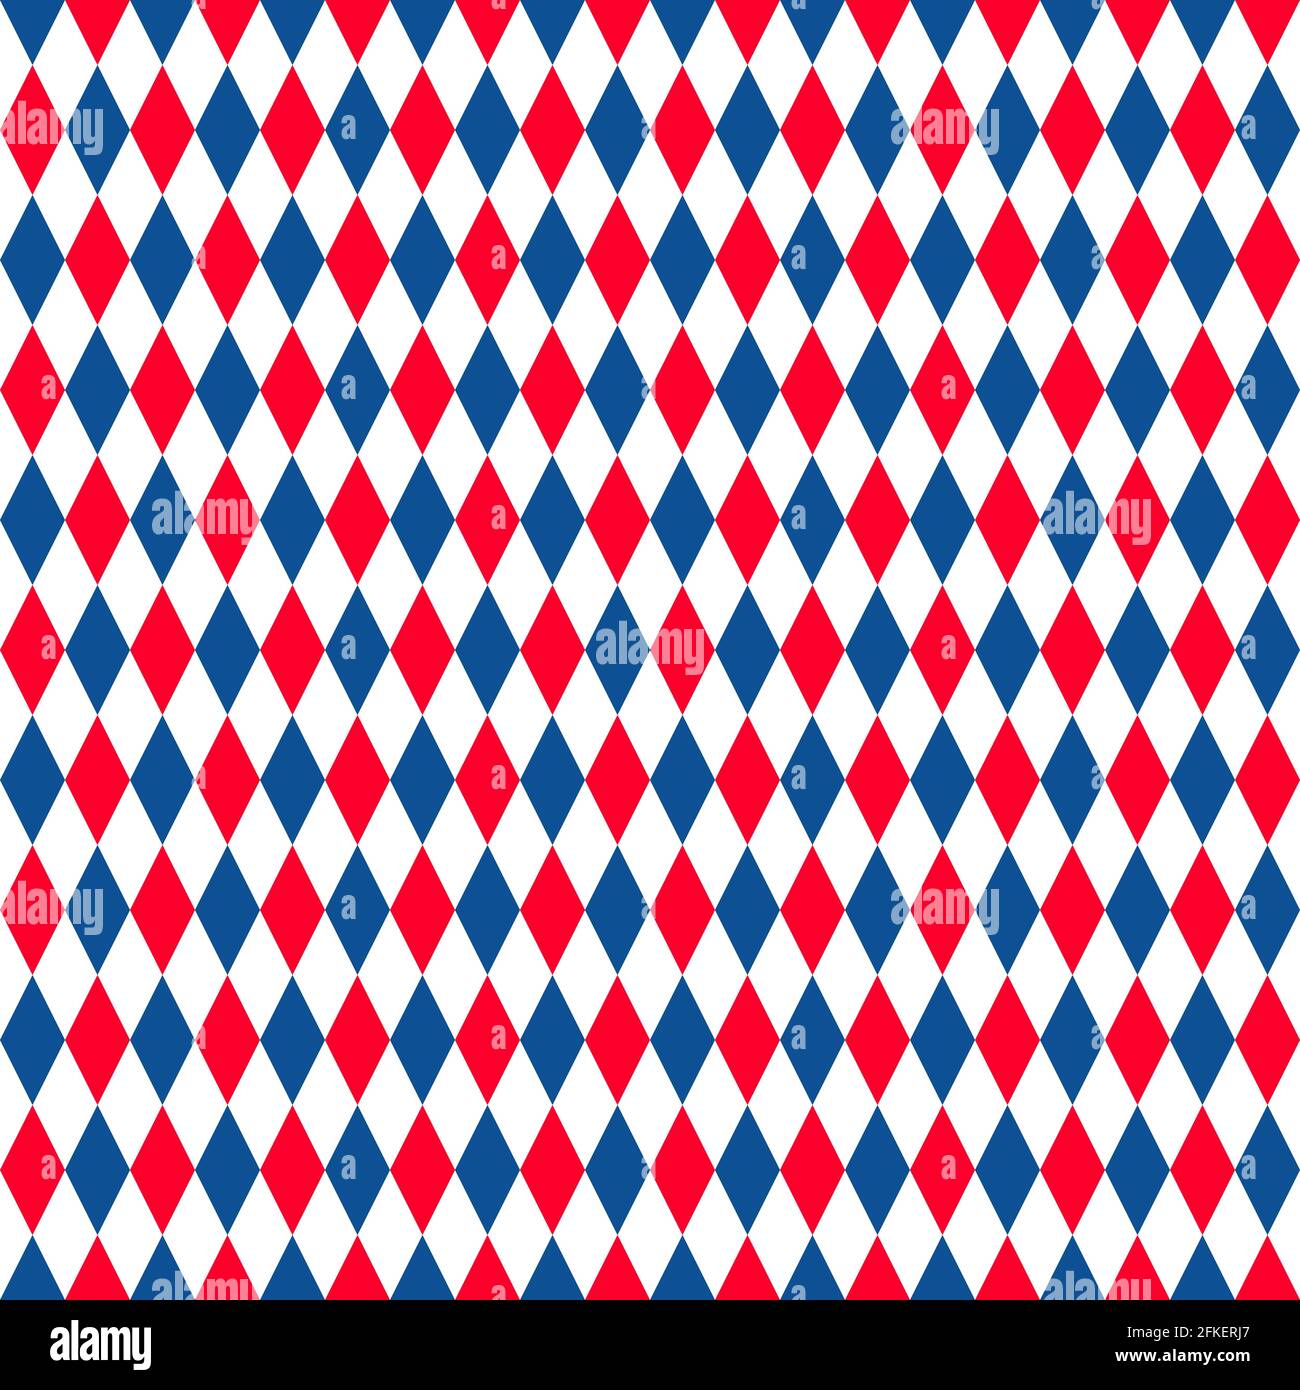 American patriotic seamless pattern USA traditional background